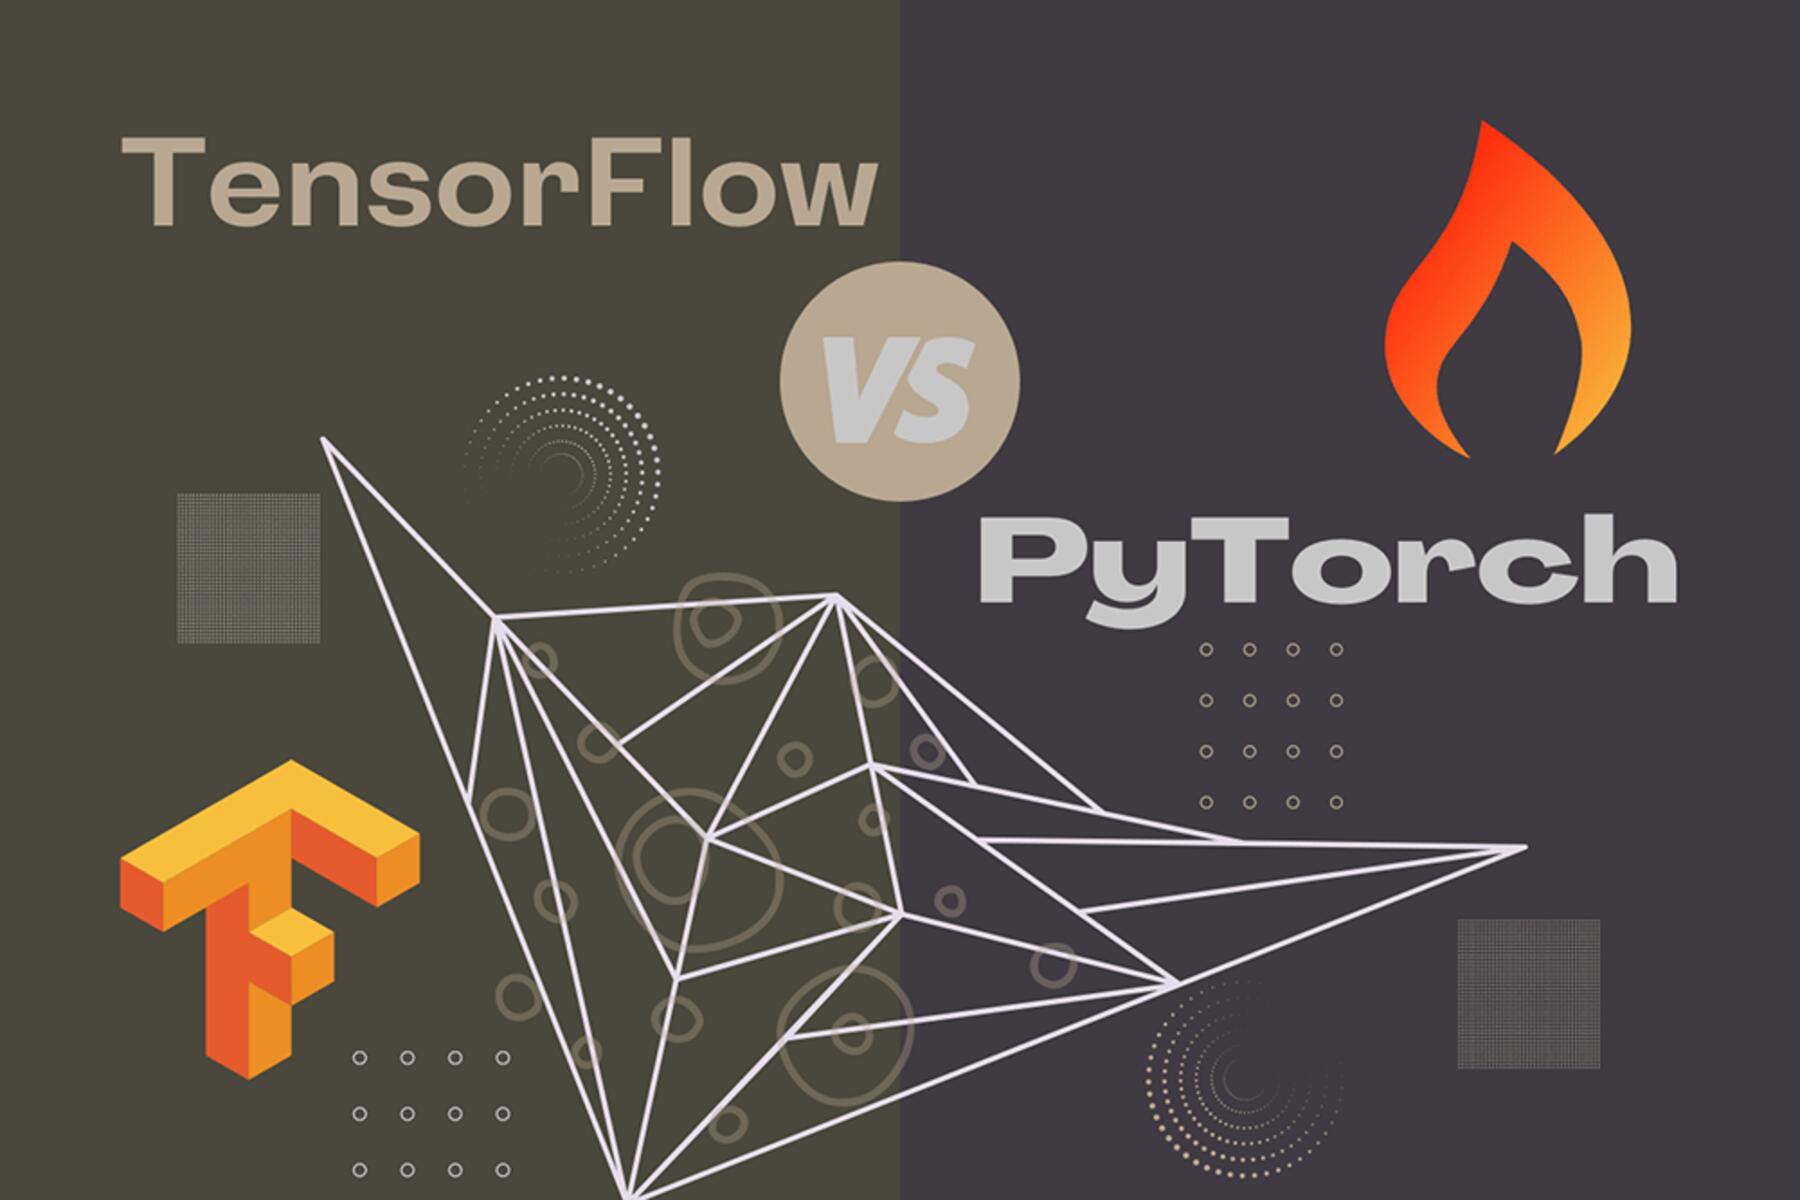 tensorflow-and-pytorch-are-examples-of-which-type-of-machine-learning-platform